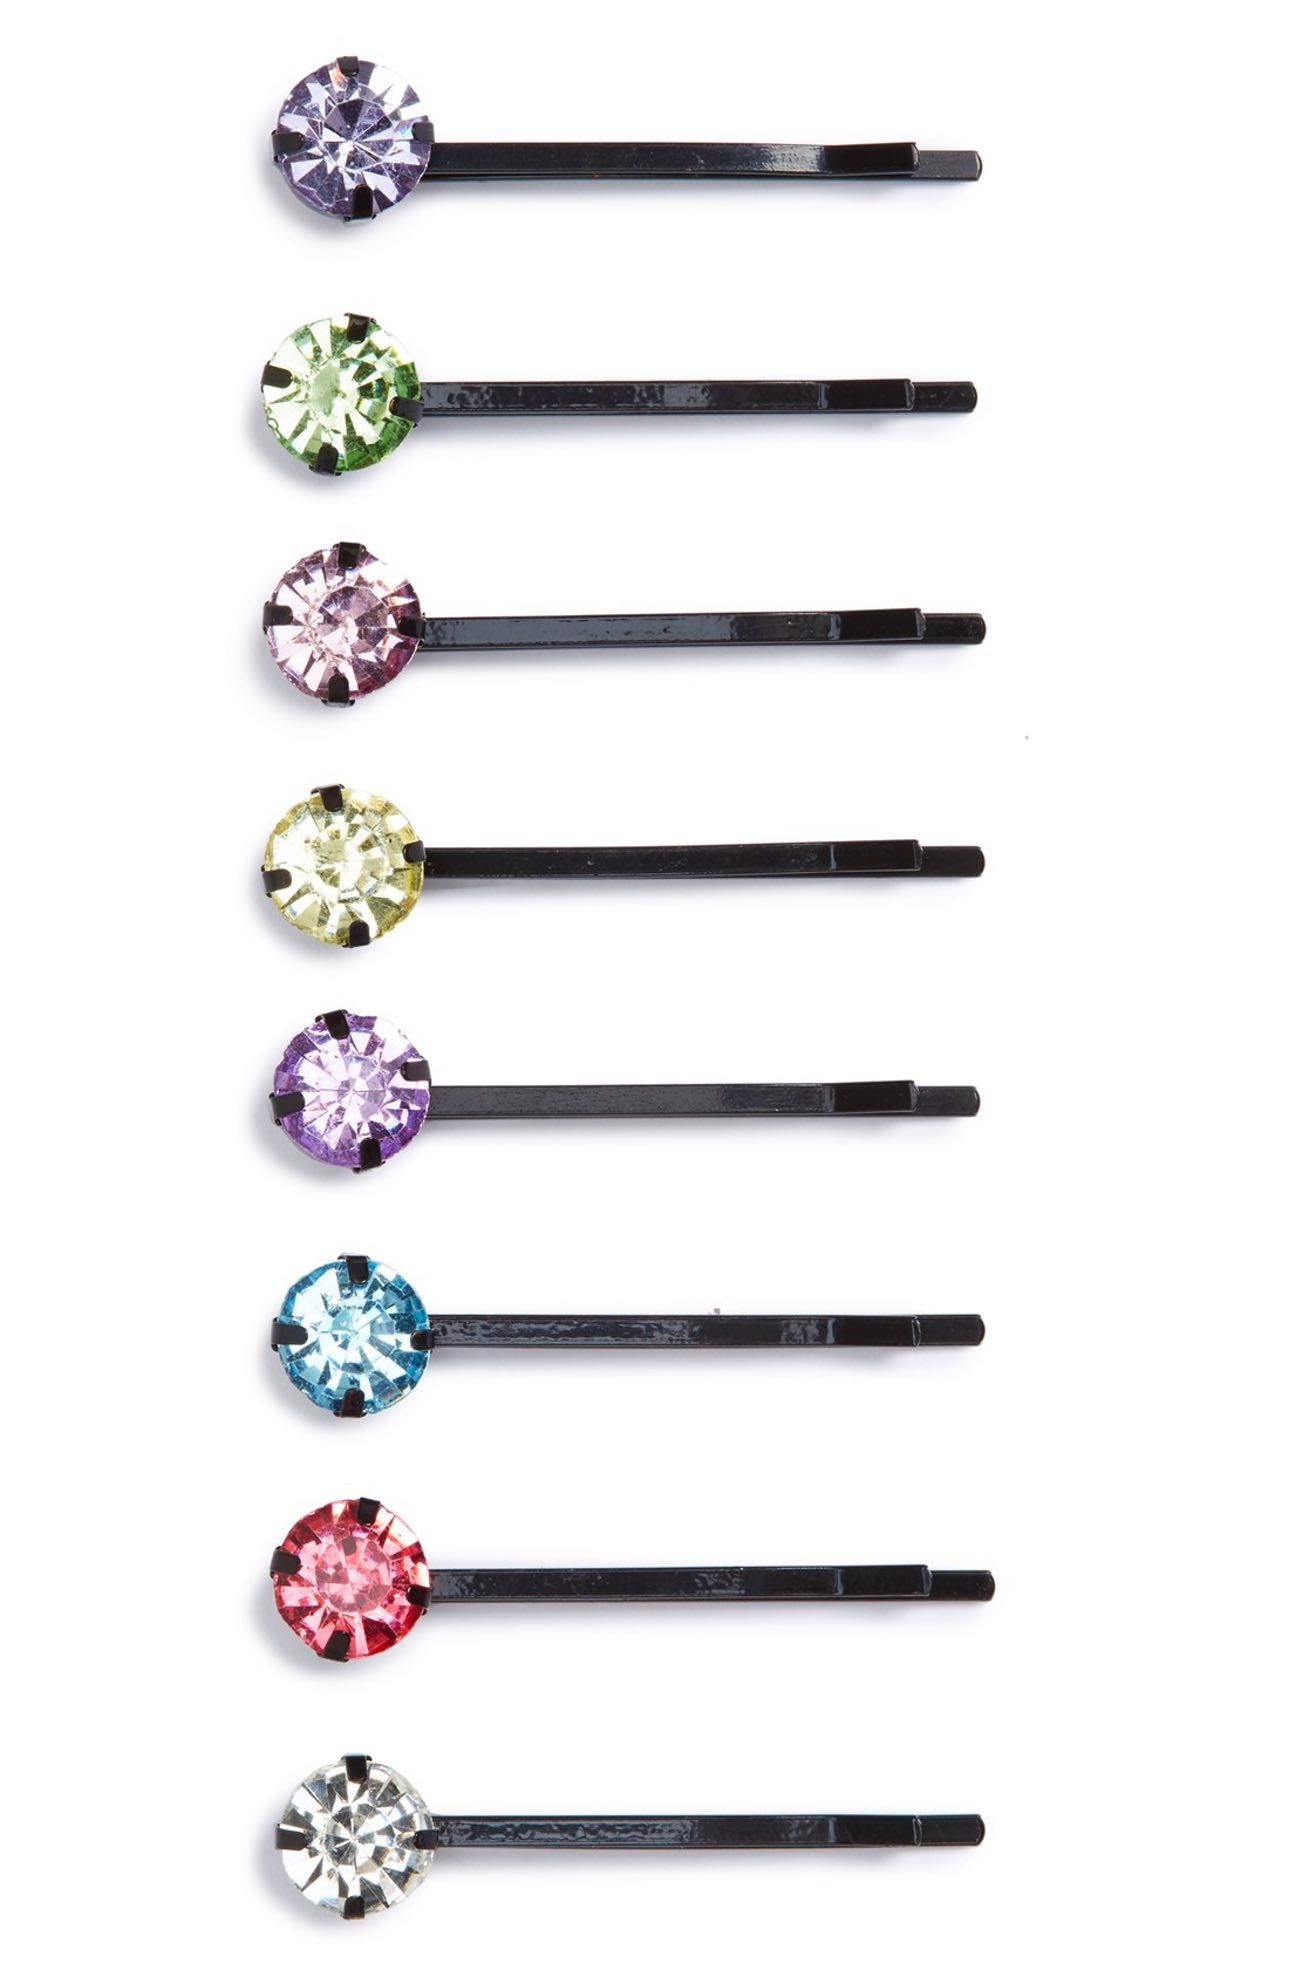 33 Blinged Out Pins and Clips You Need To Nail This Hair Trend